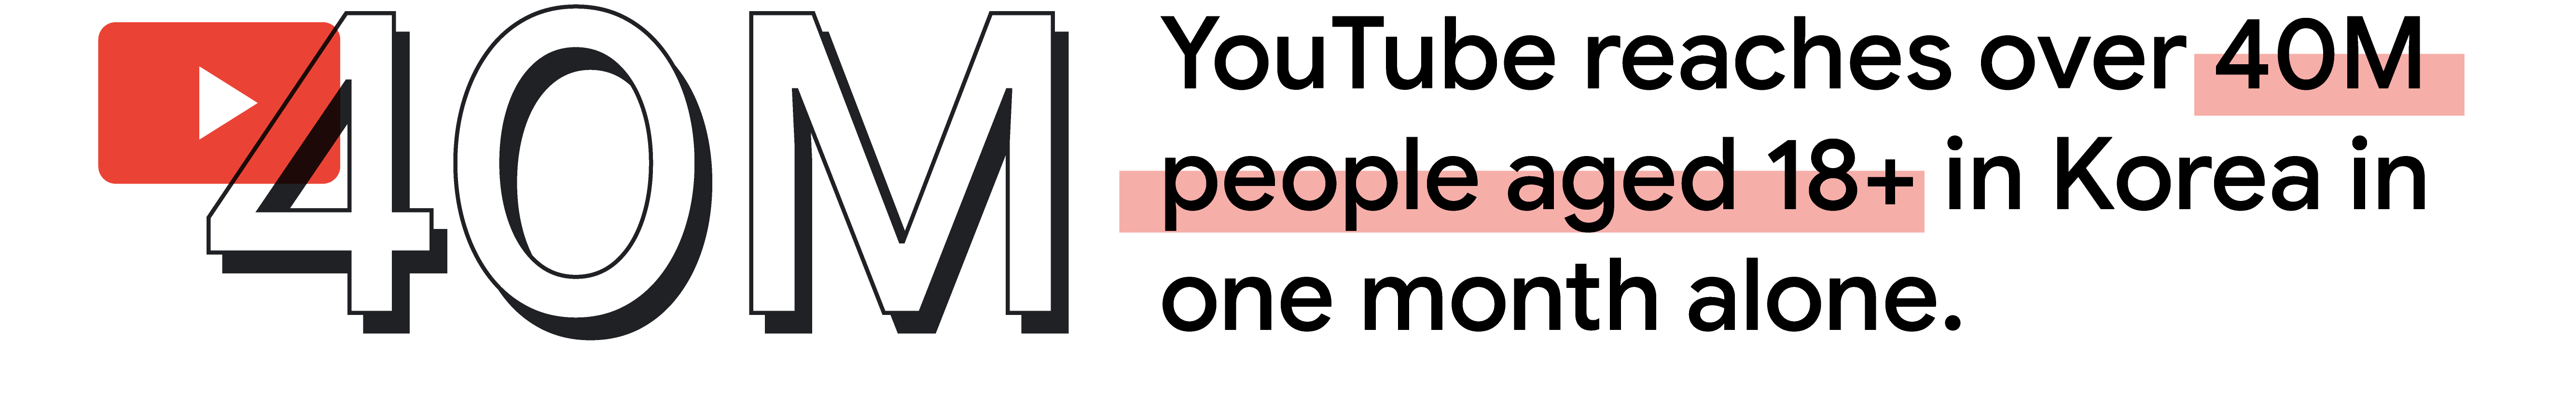 YouTube reaches over 40M people aged 18+ in Korea in one month alone.